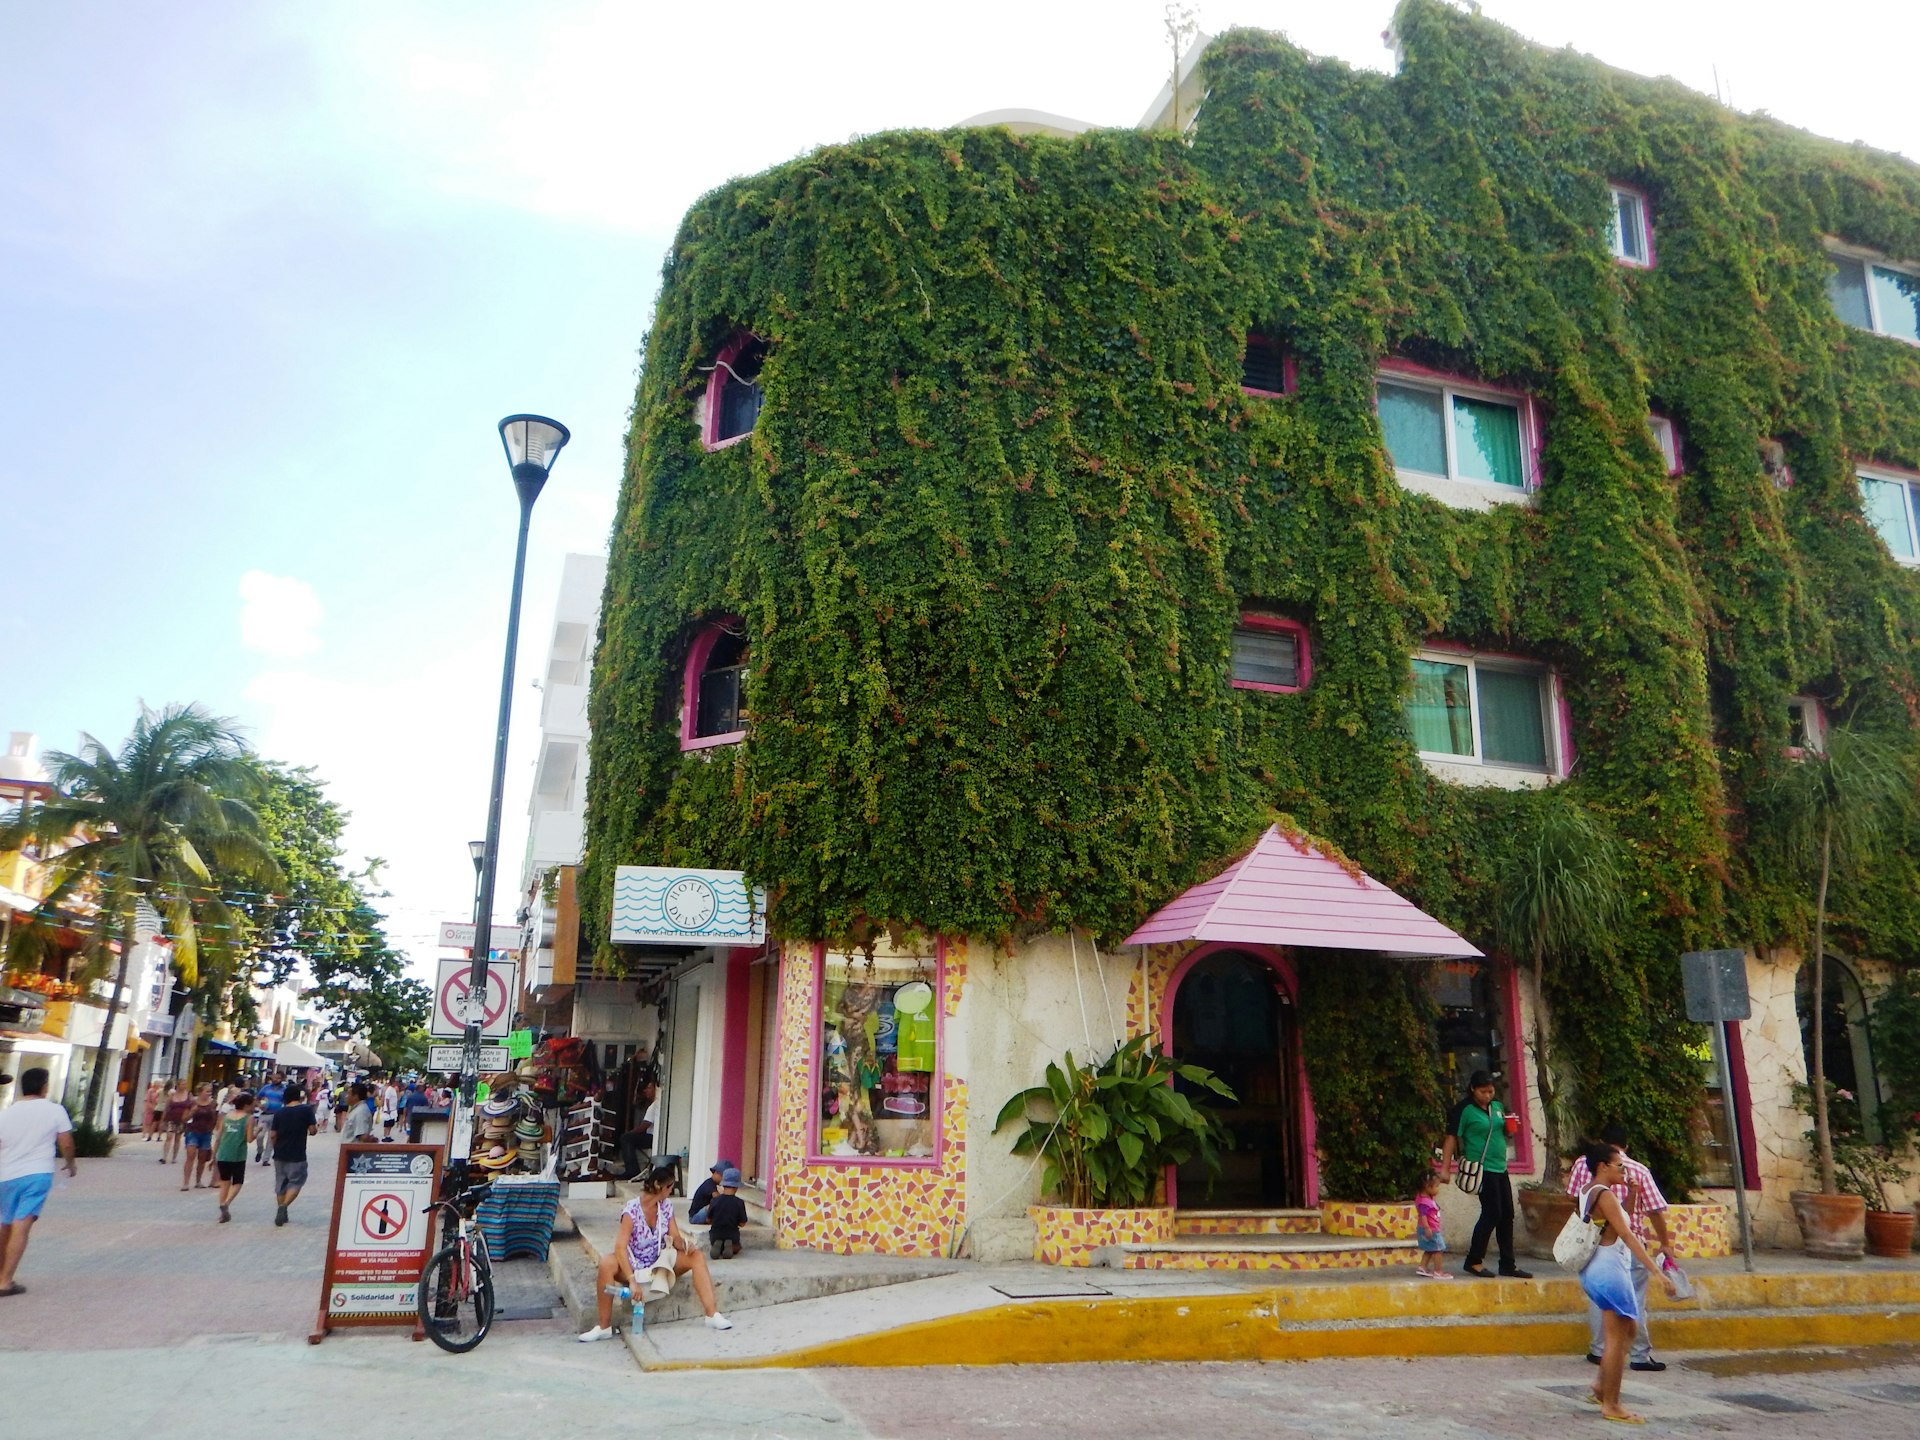 Outside image of a Playa del Carmen street with a vine covered building